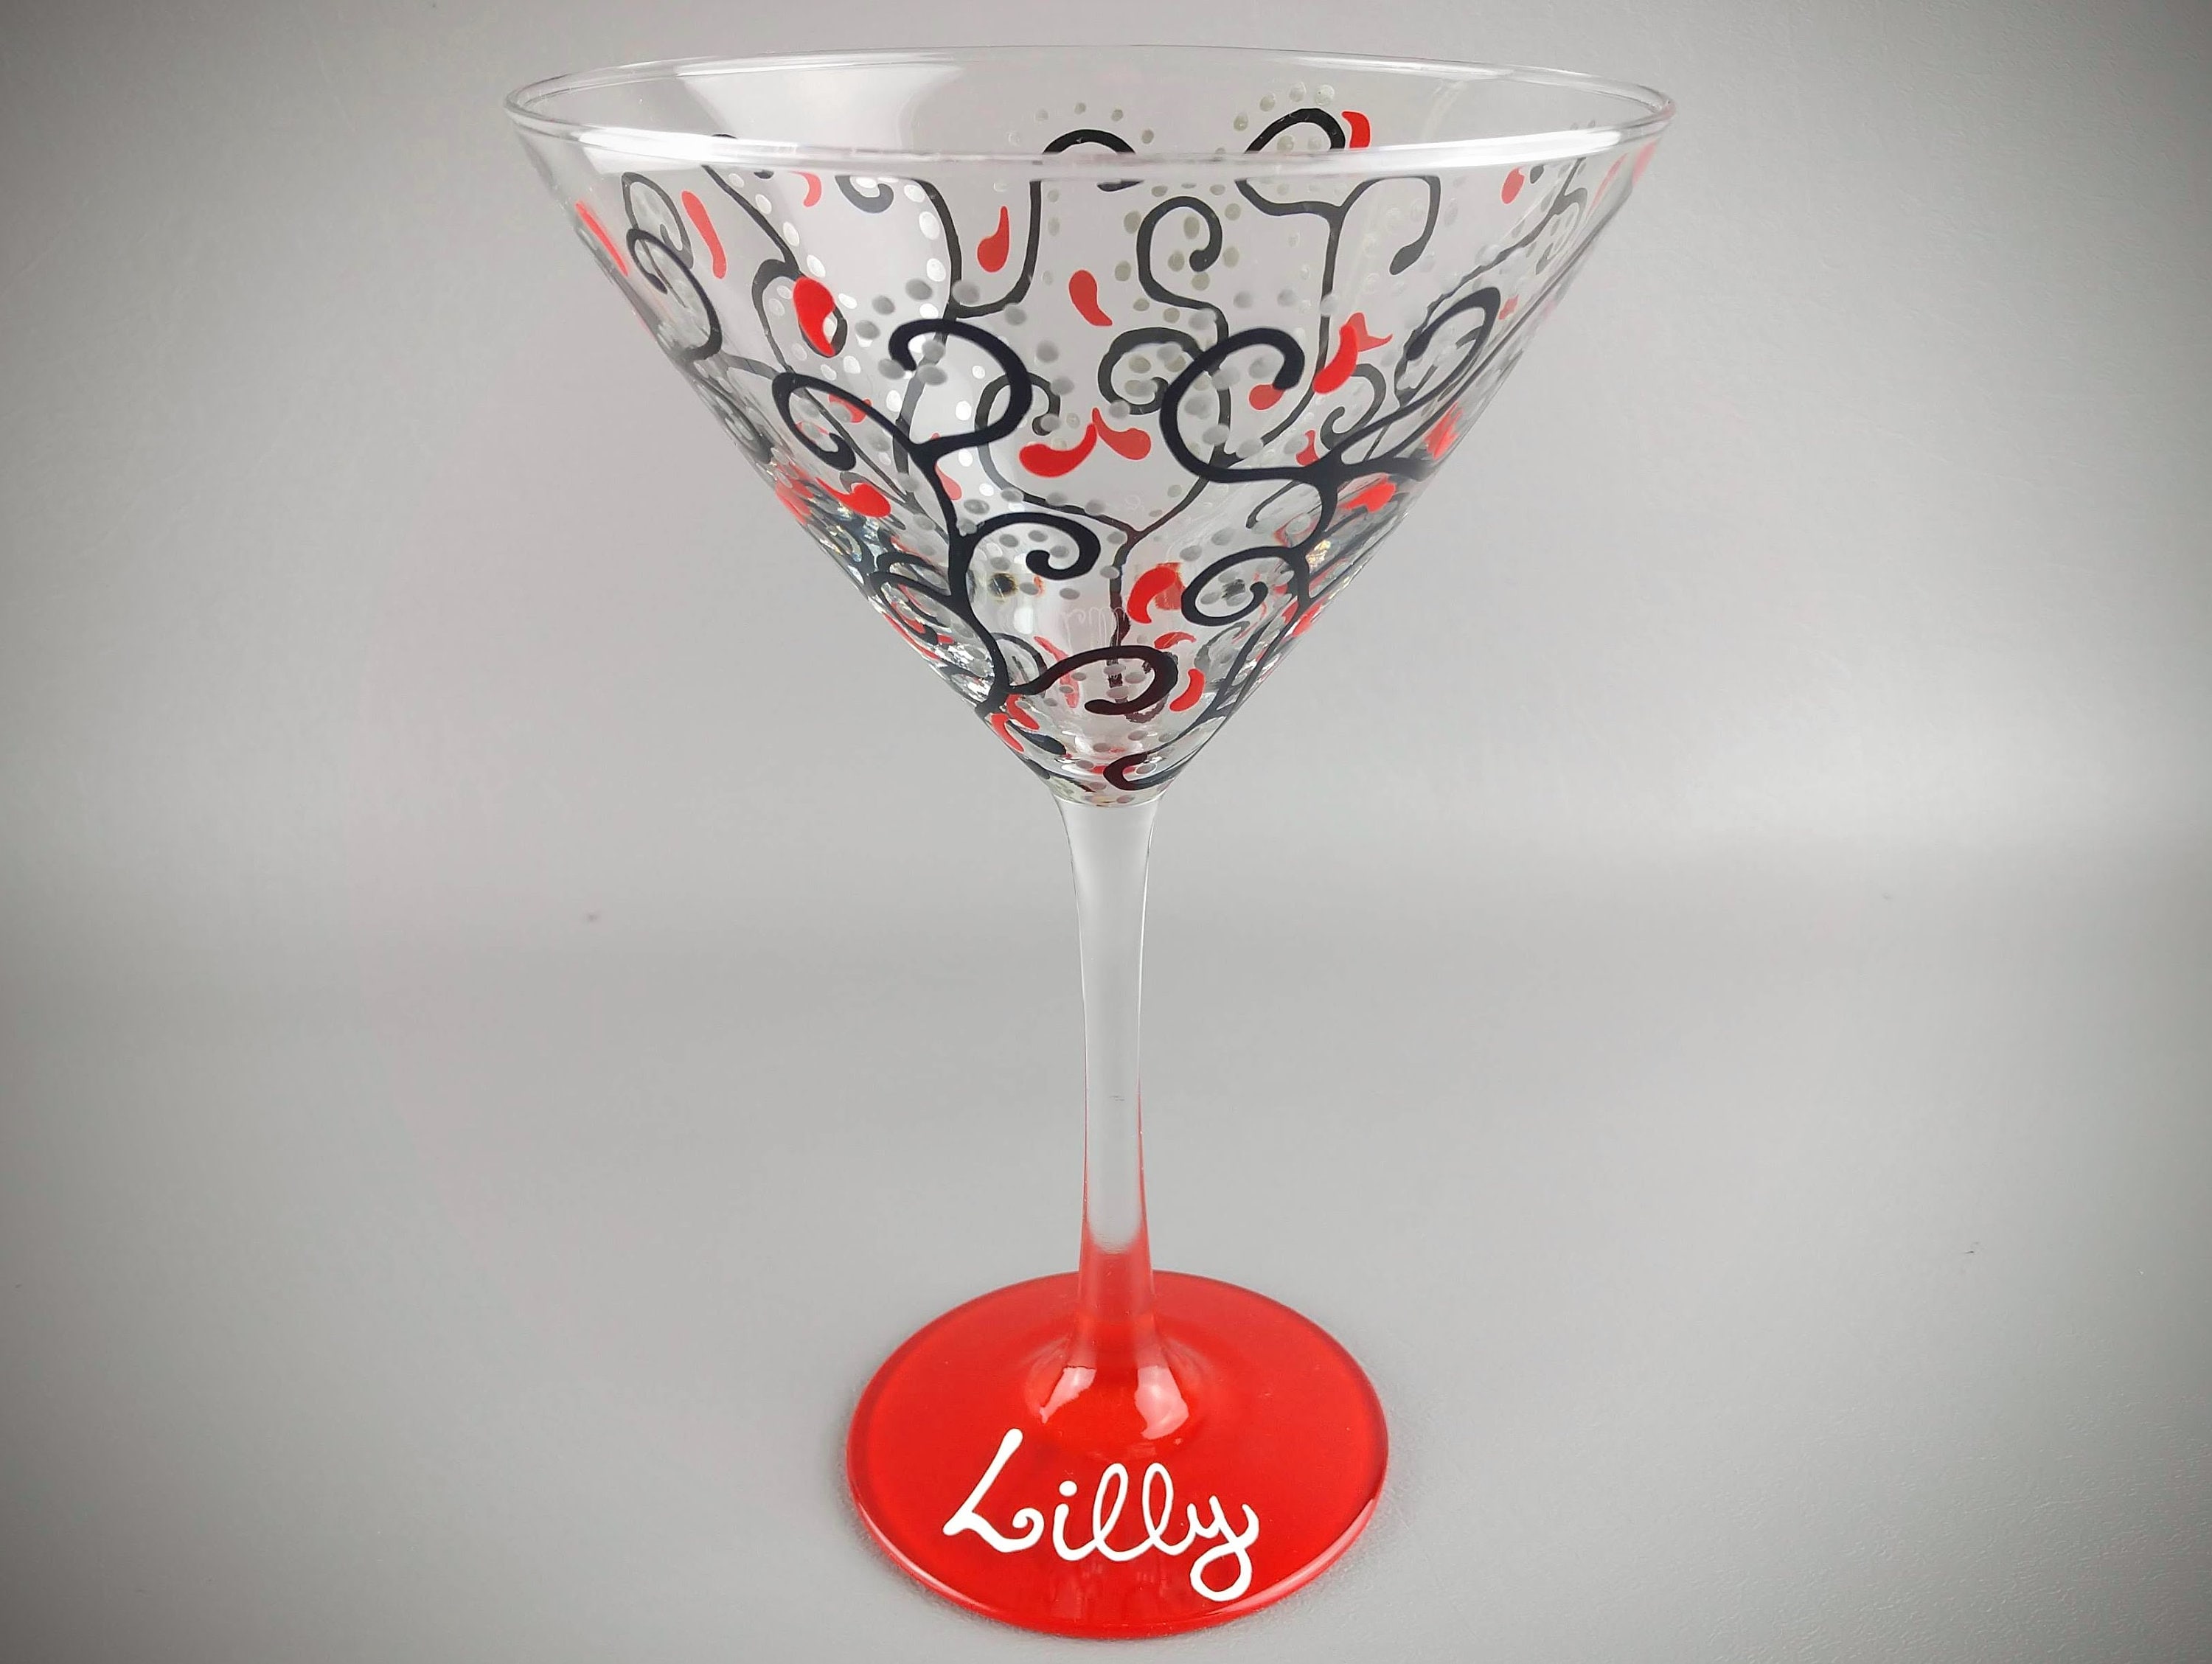 Martini Glasses Black Red Crystals Hand-painted Set of 2 